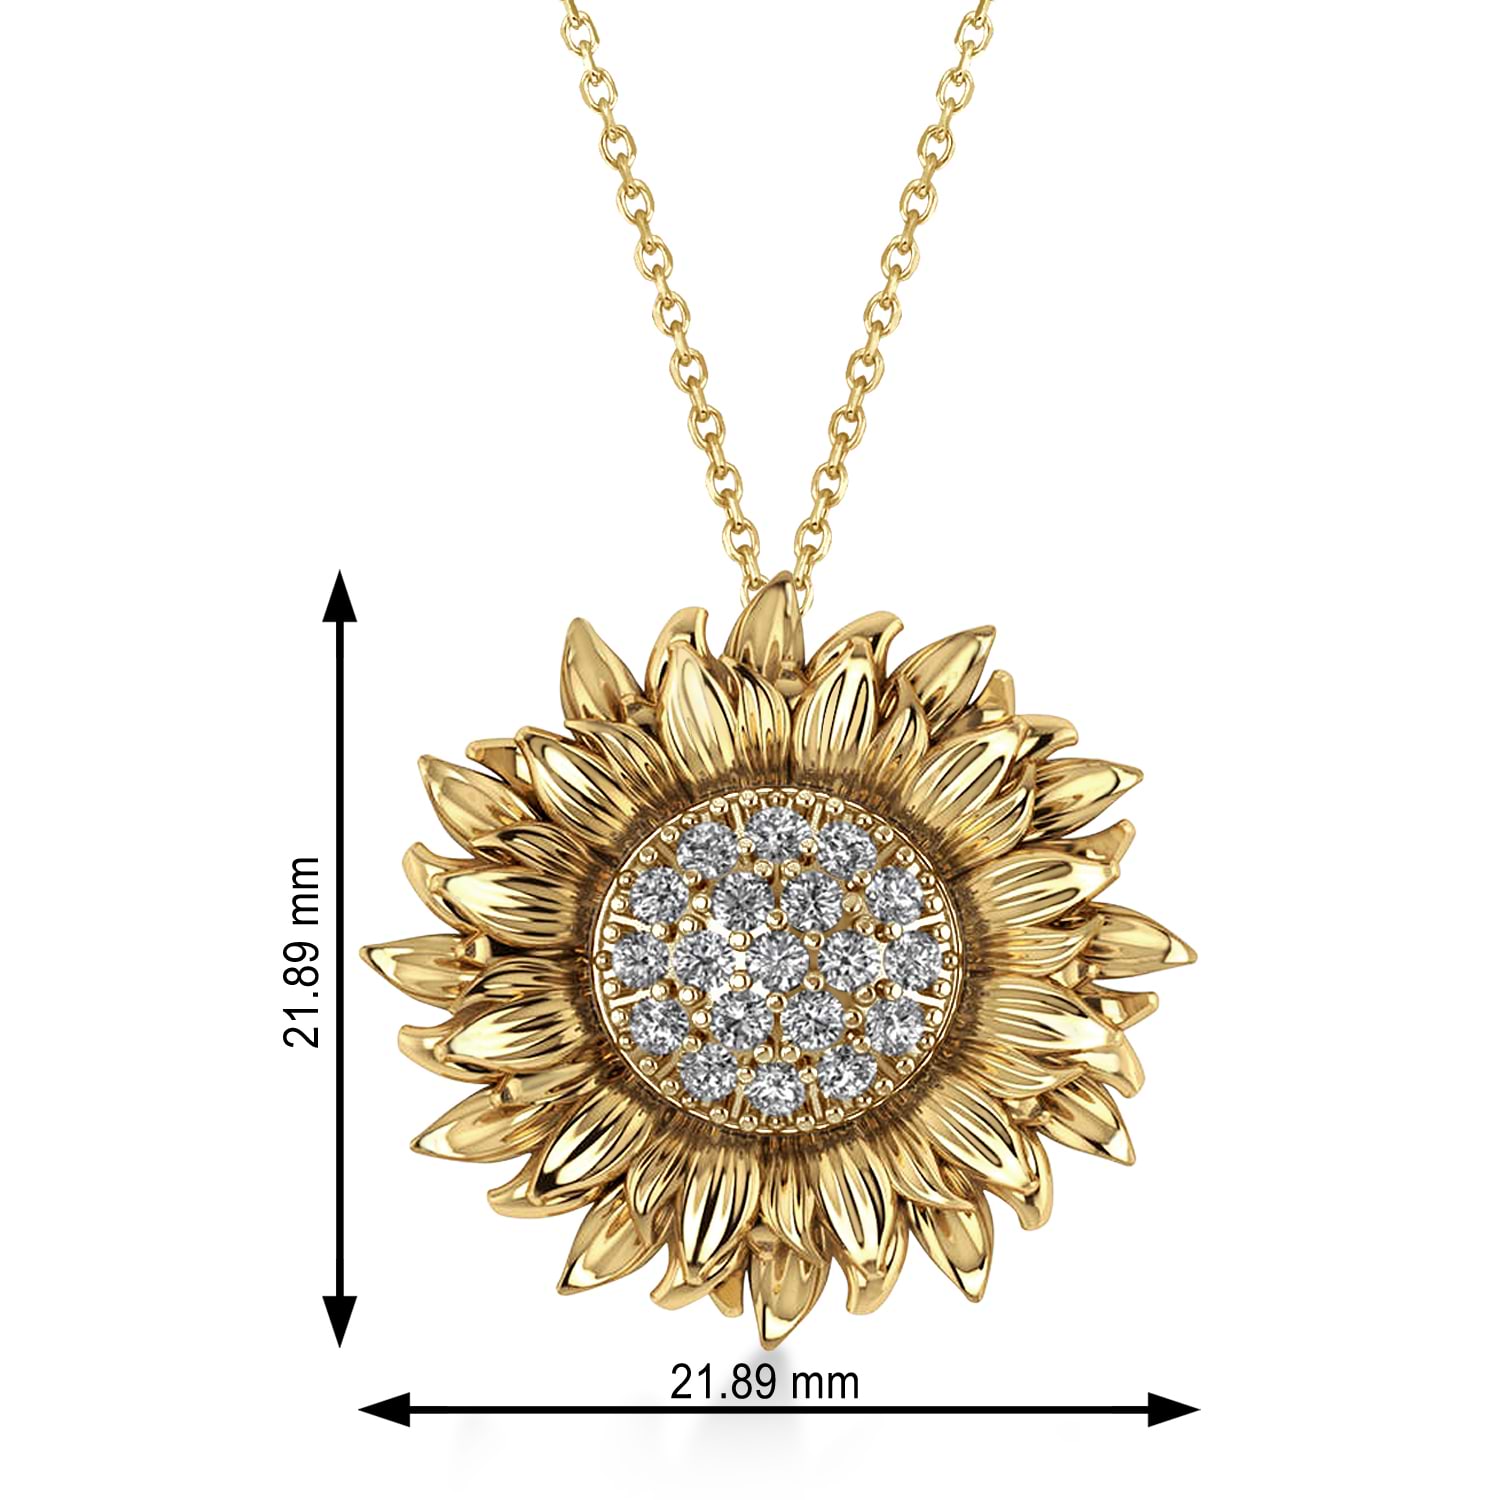 Charm Fashion Gold Plated Sunflower Pendant Chain Necklace Jewelry Gift |  Wish